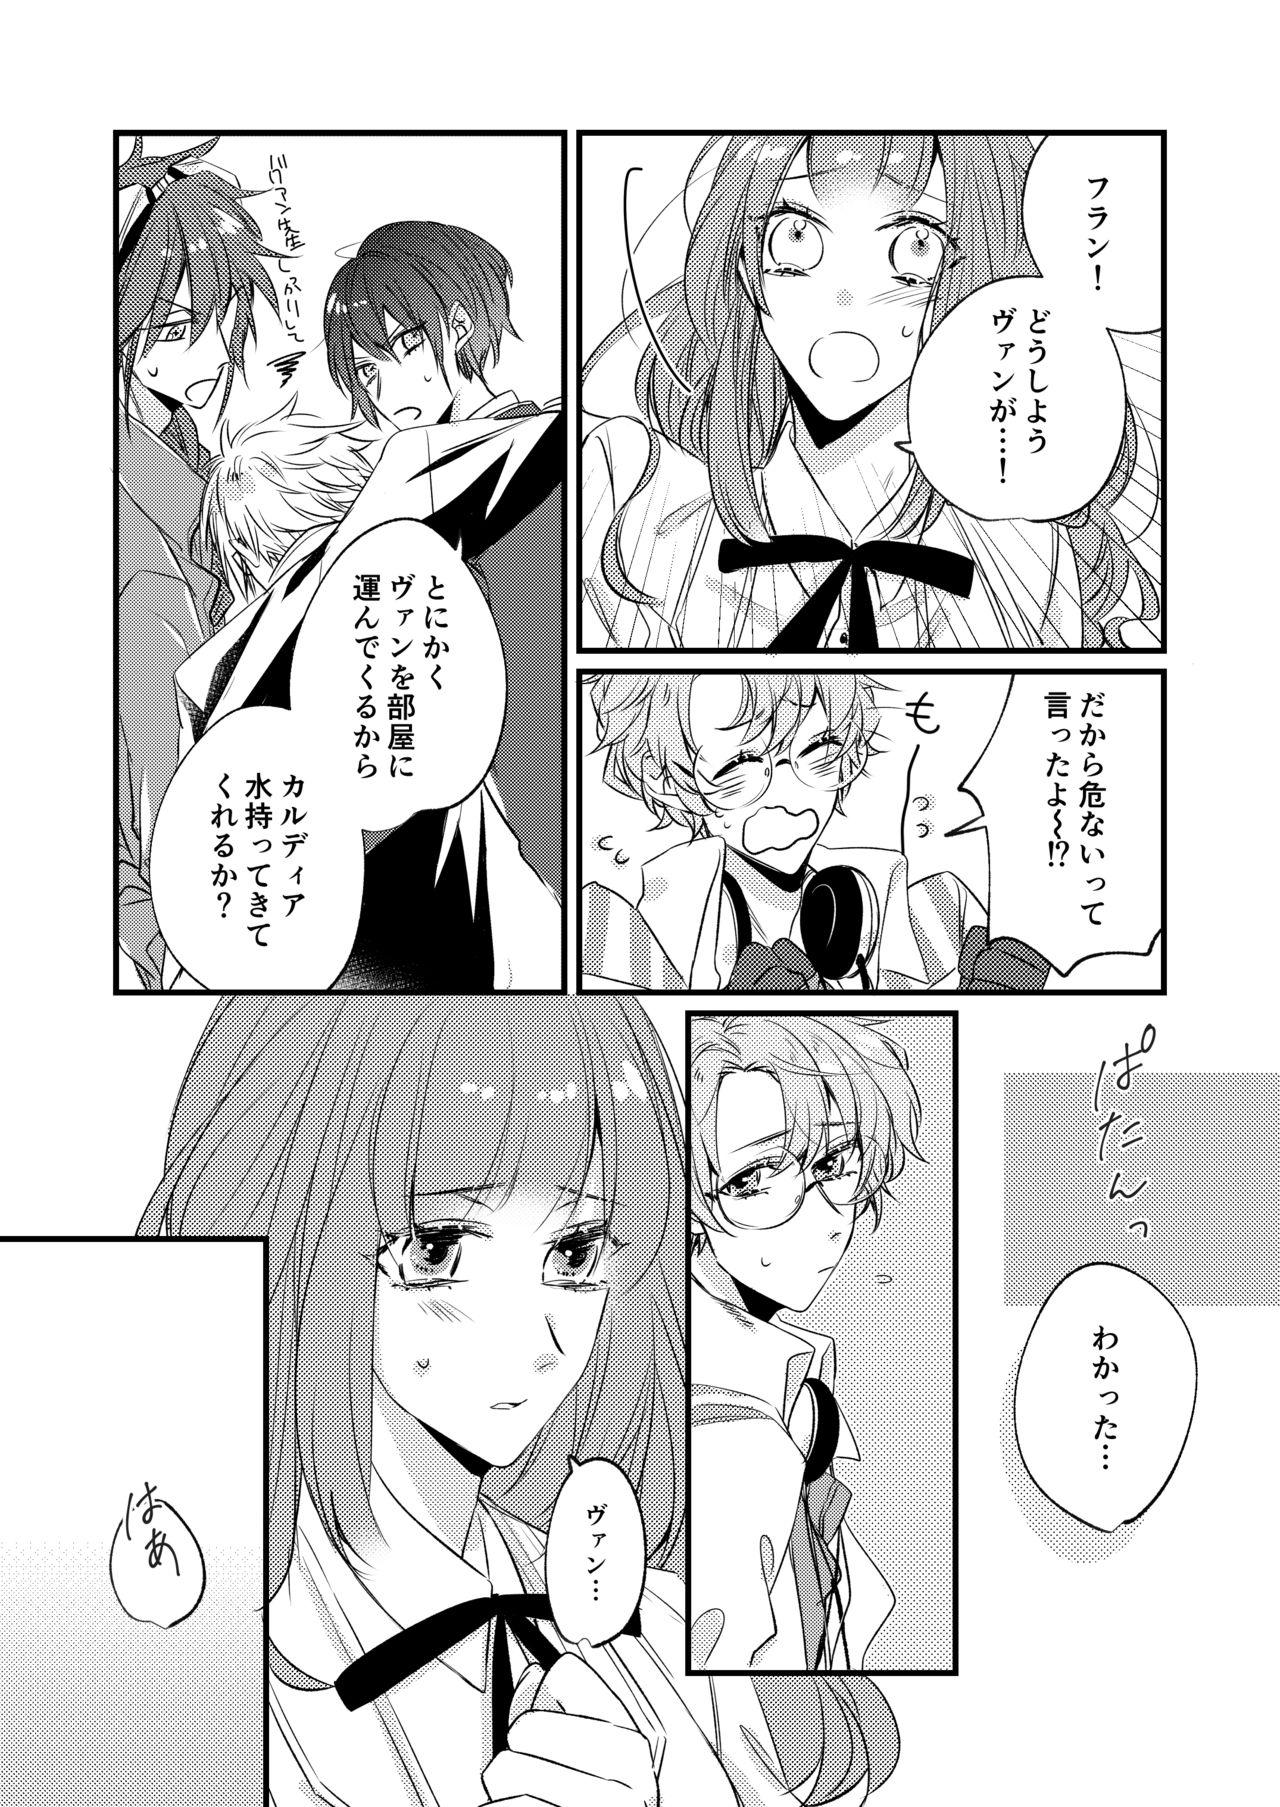 18yearsold 熱におぼれる - Code realize sousei no himegimi Curves - Page 9